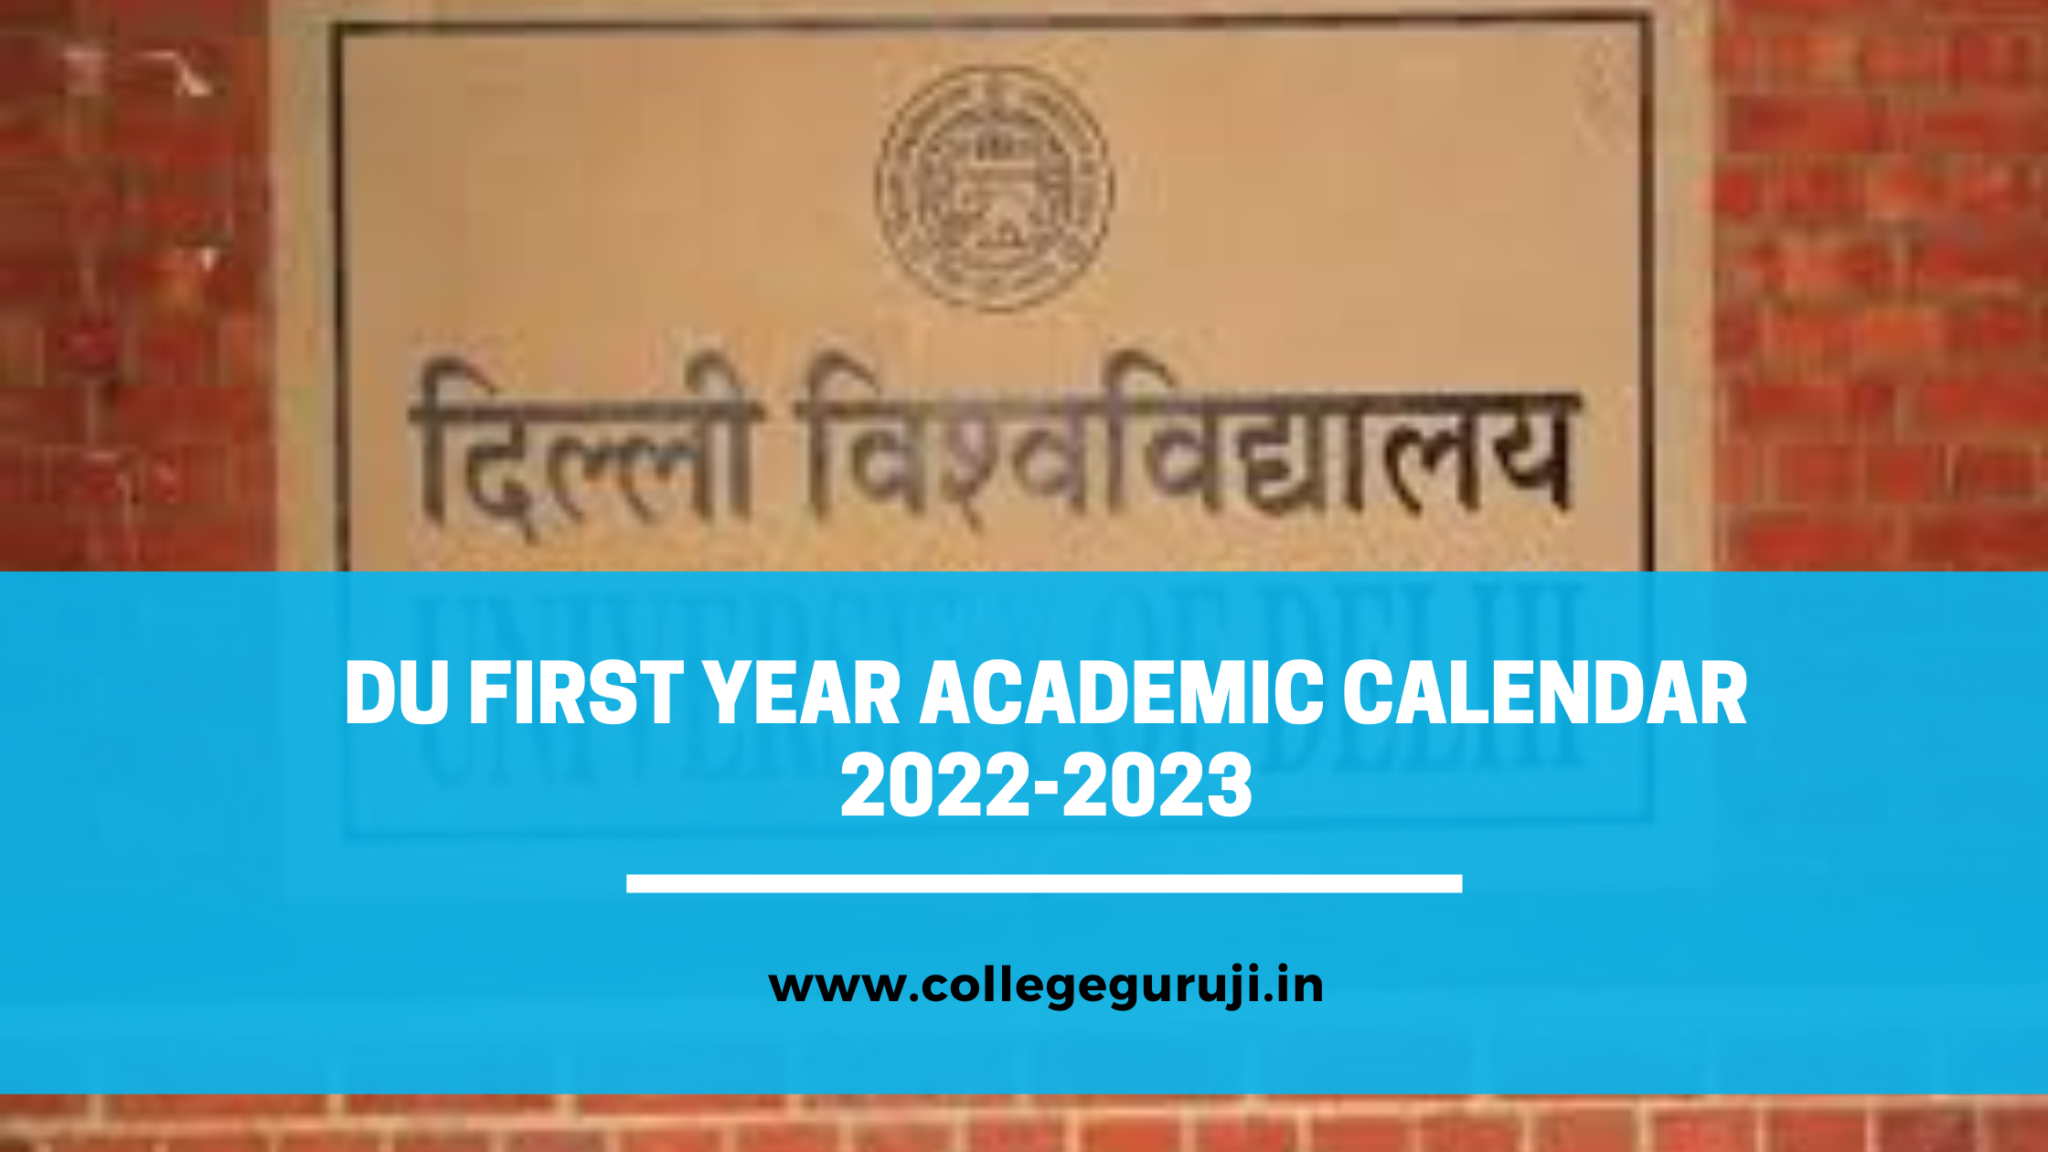 Delhi University Academic Calendar 2022 for the first year of